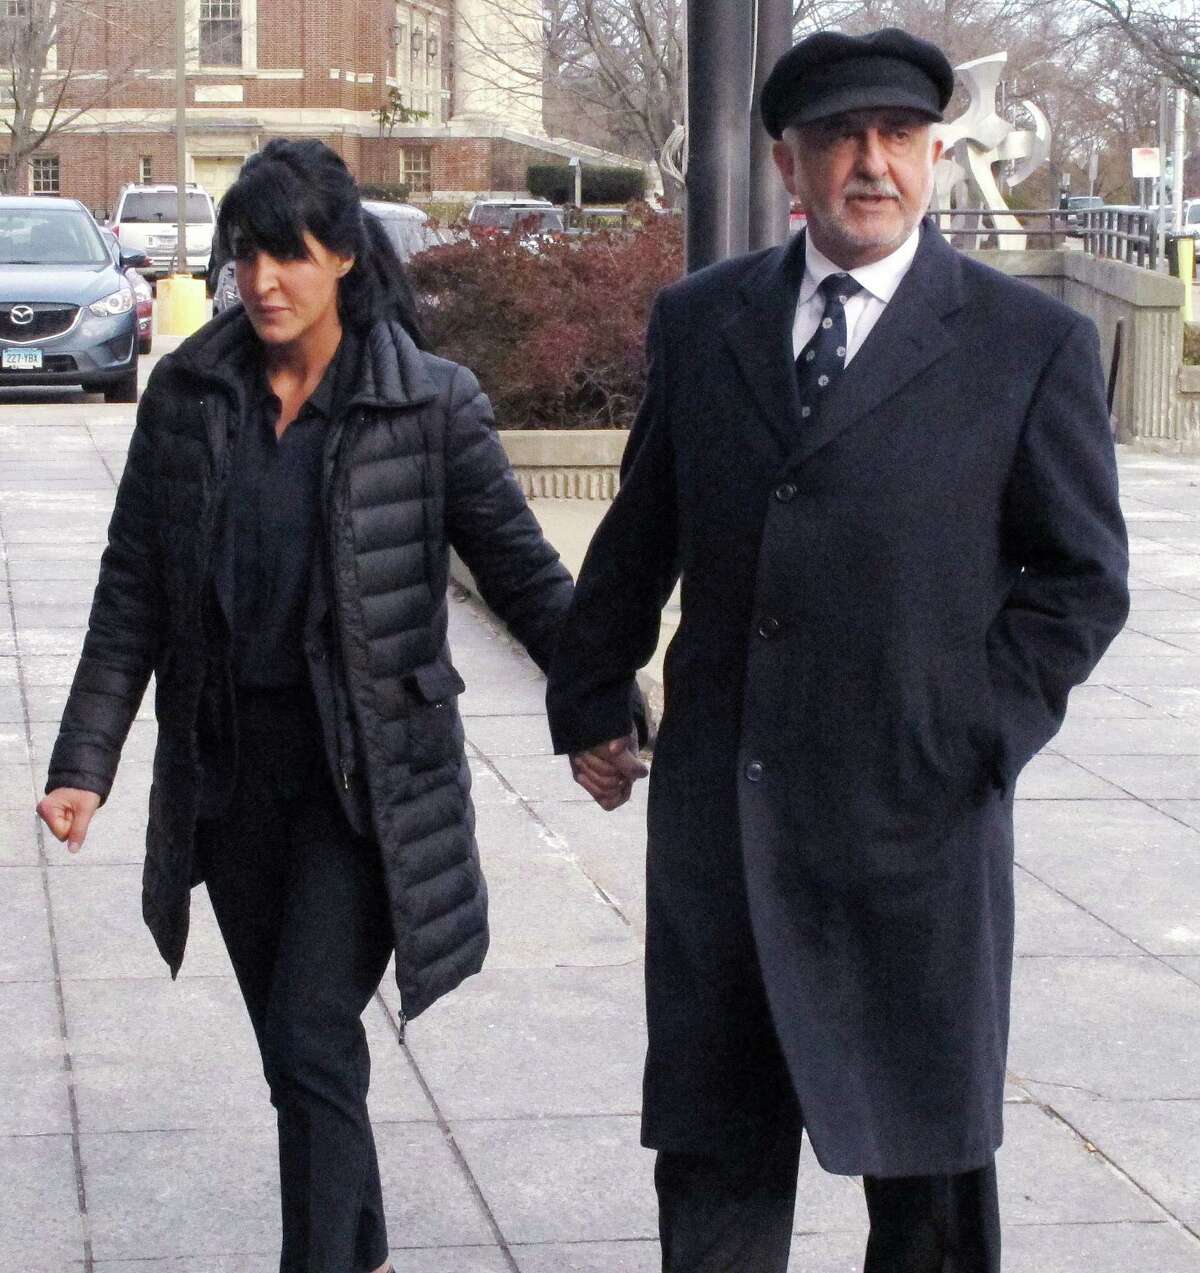 Tiffany Stevens, left, walks with her father, Edward Khalily, to Superior Court on the first day of her trial in Hartford, Conn., Tuesday, Dec. 2, 2014. (AP Photo/Dave Collins)